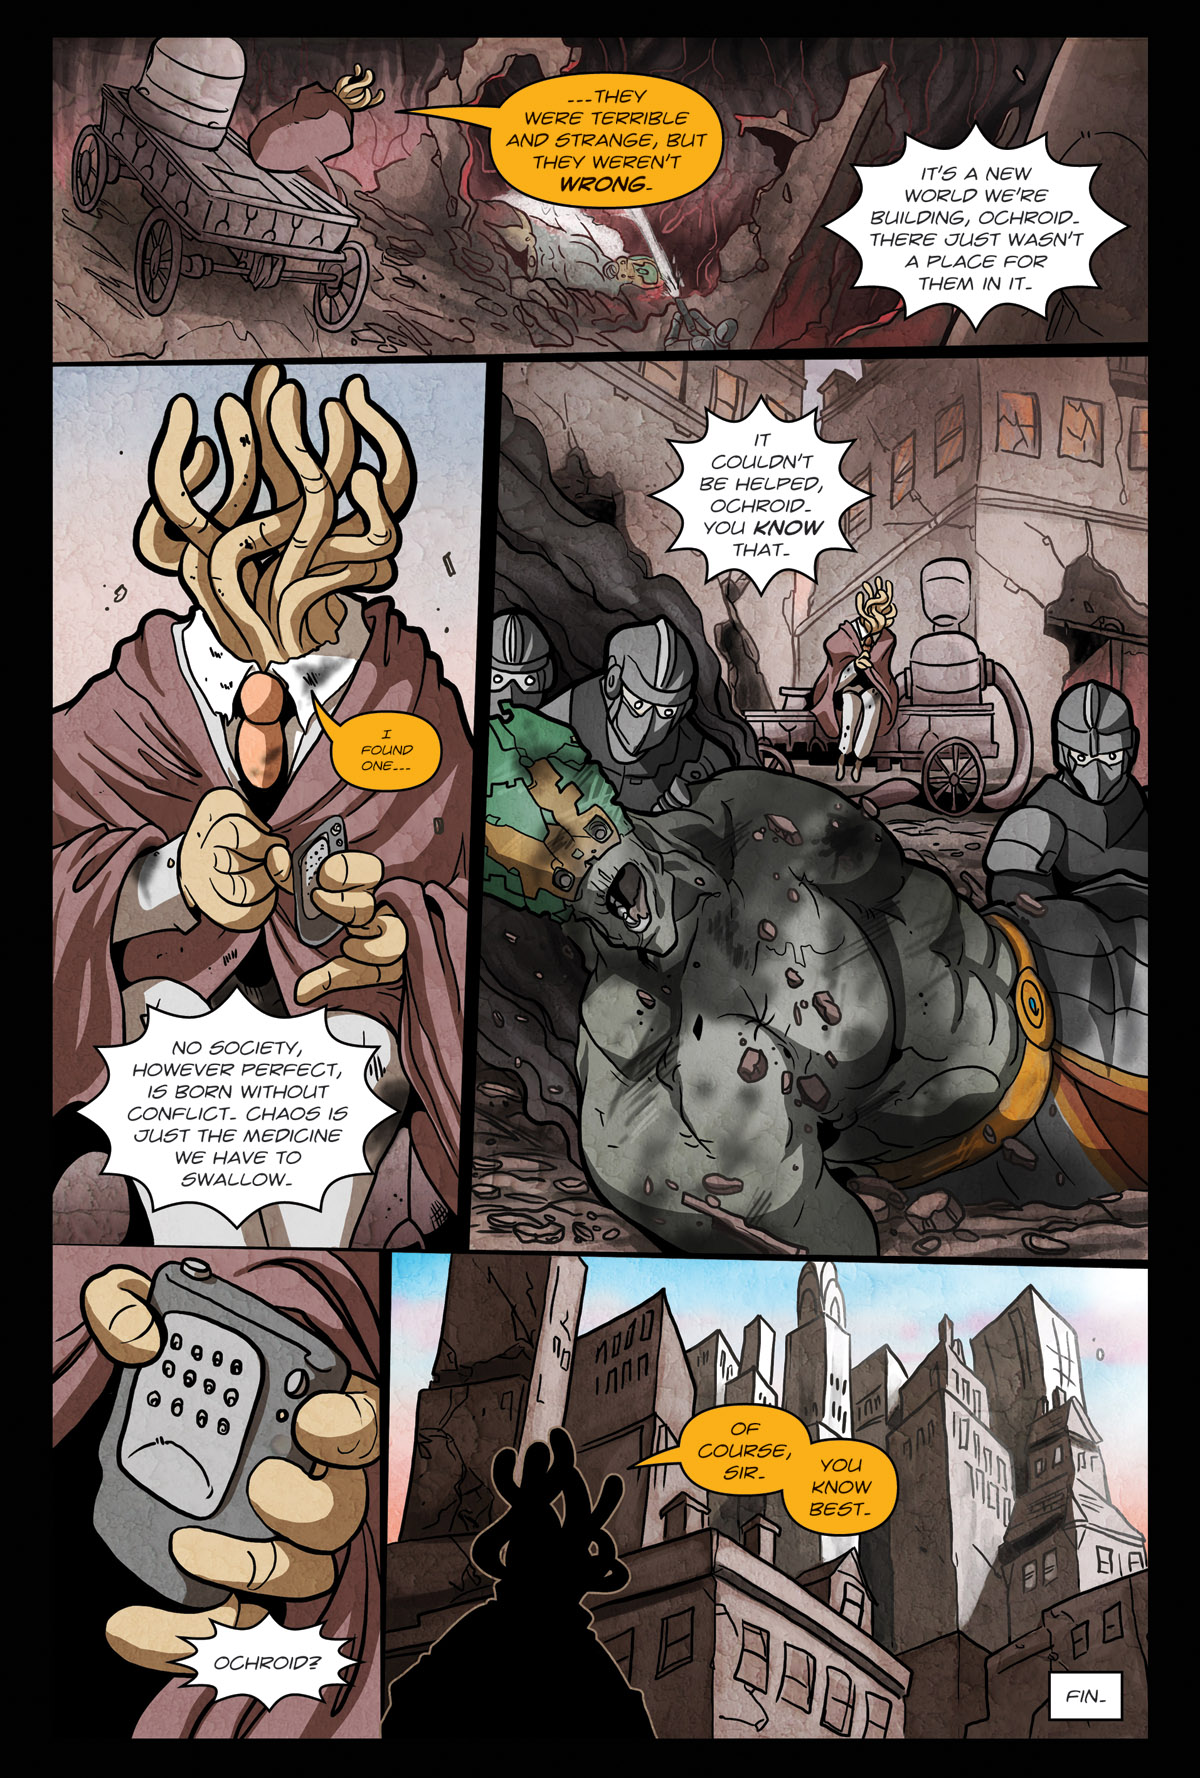 Afterlife Inc. | Dead Days | Ochroid | Page 4